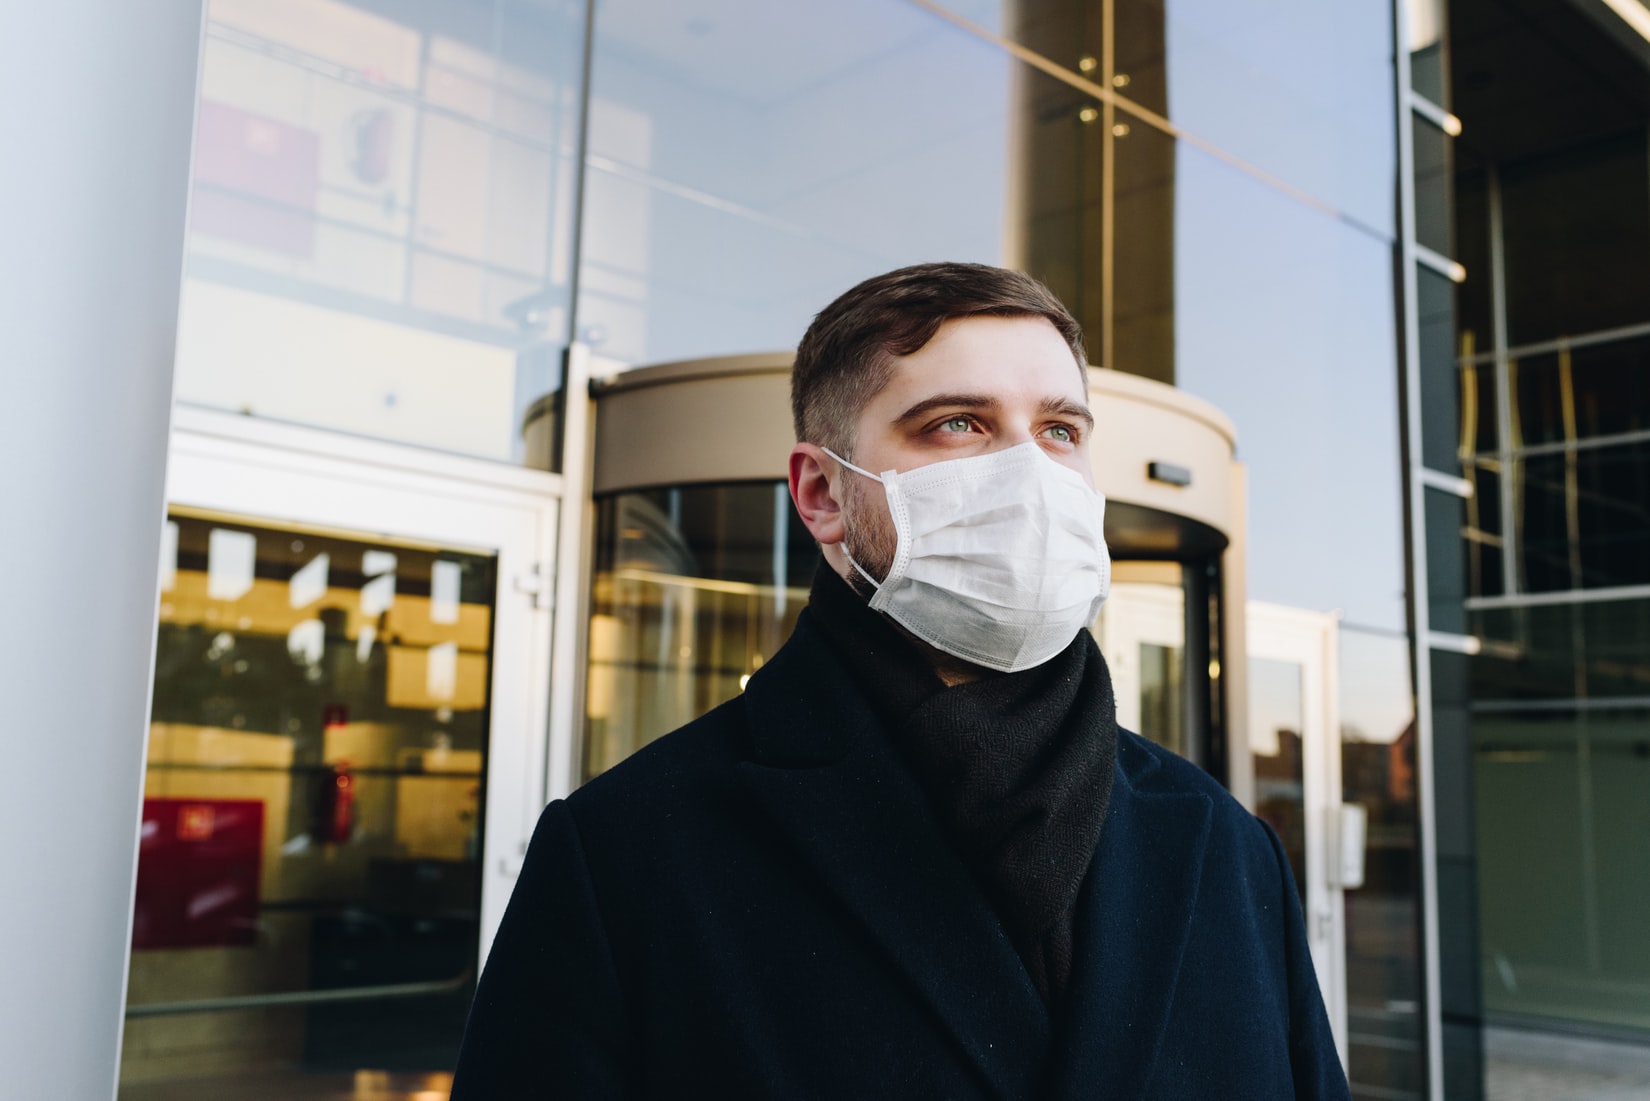 Man wearing mask in front of building